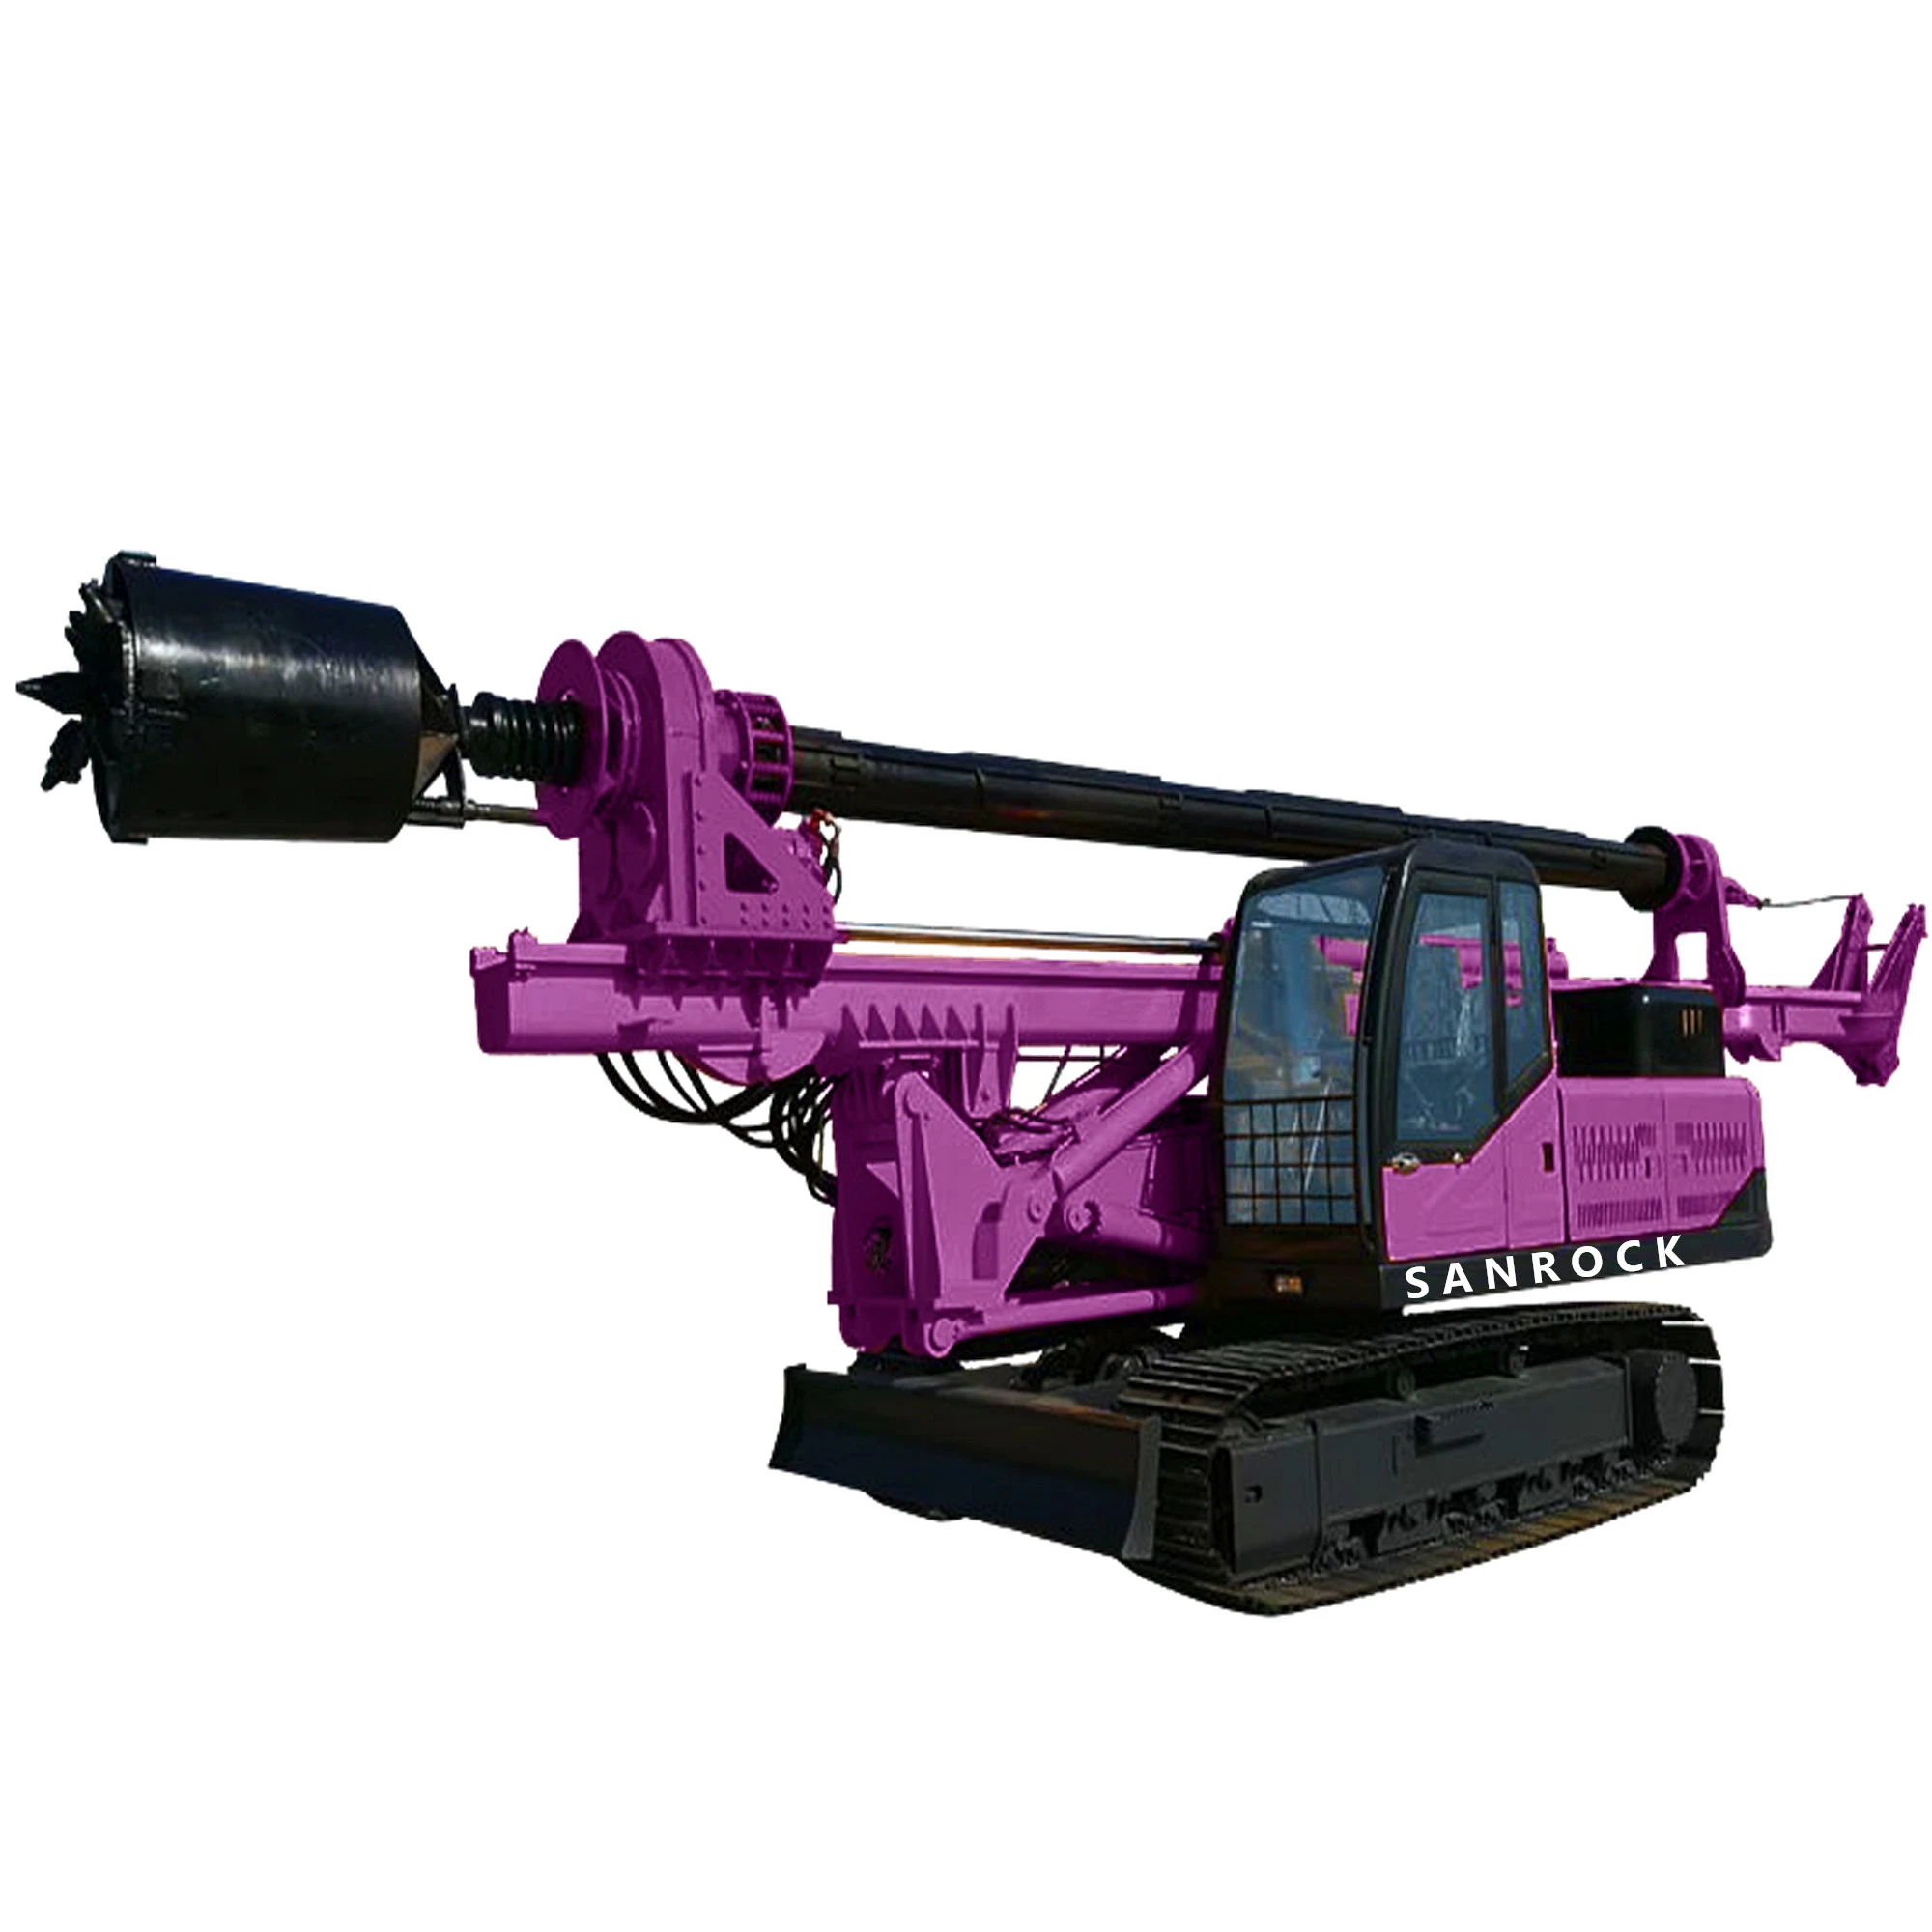 Auger Borehole Rotary Drilling Rig Engineering Construction Hydraulic Rotary Drilling Machine